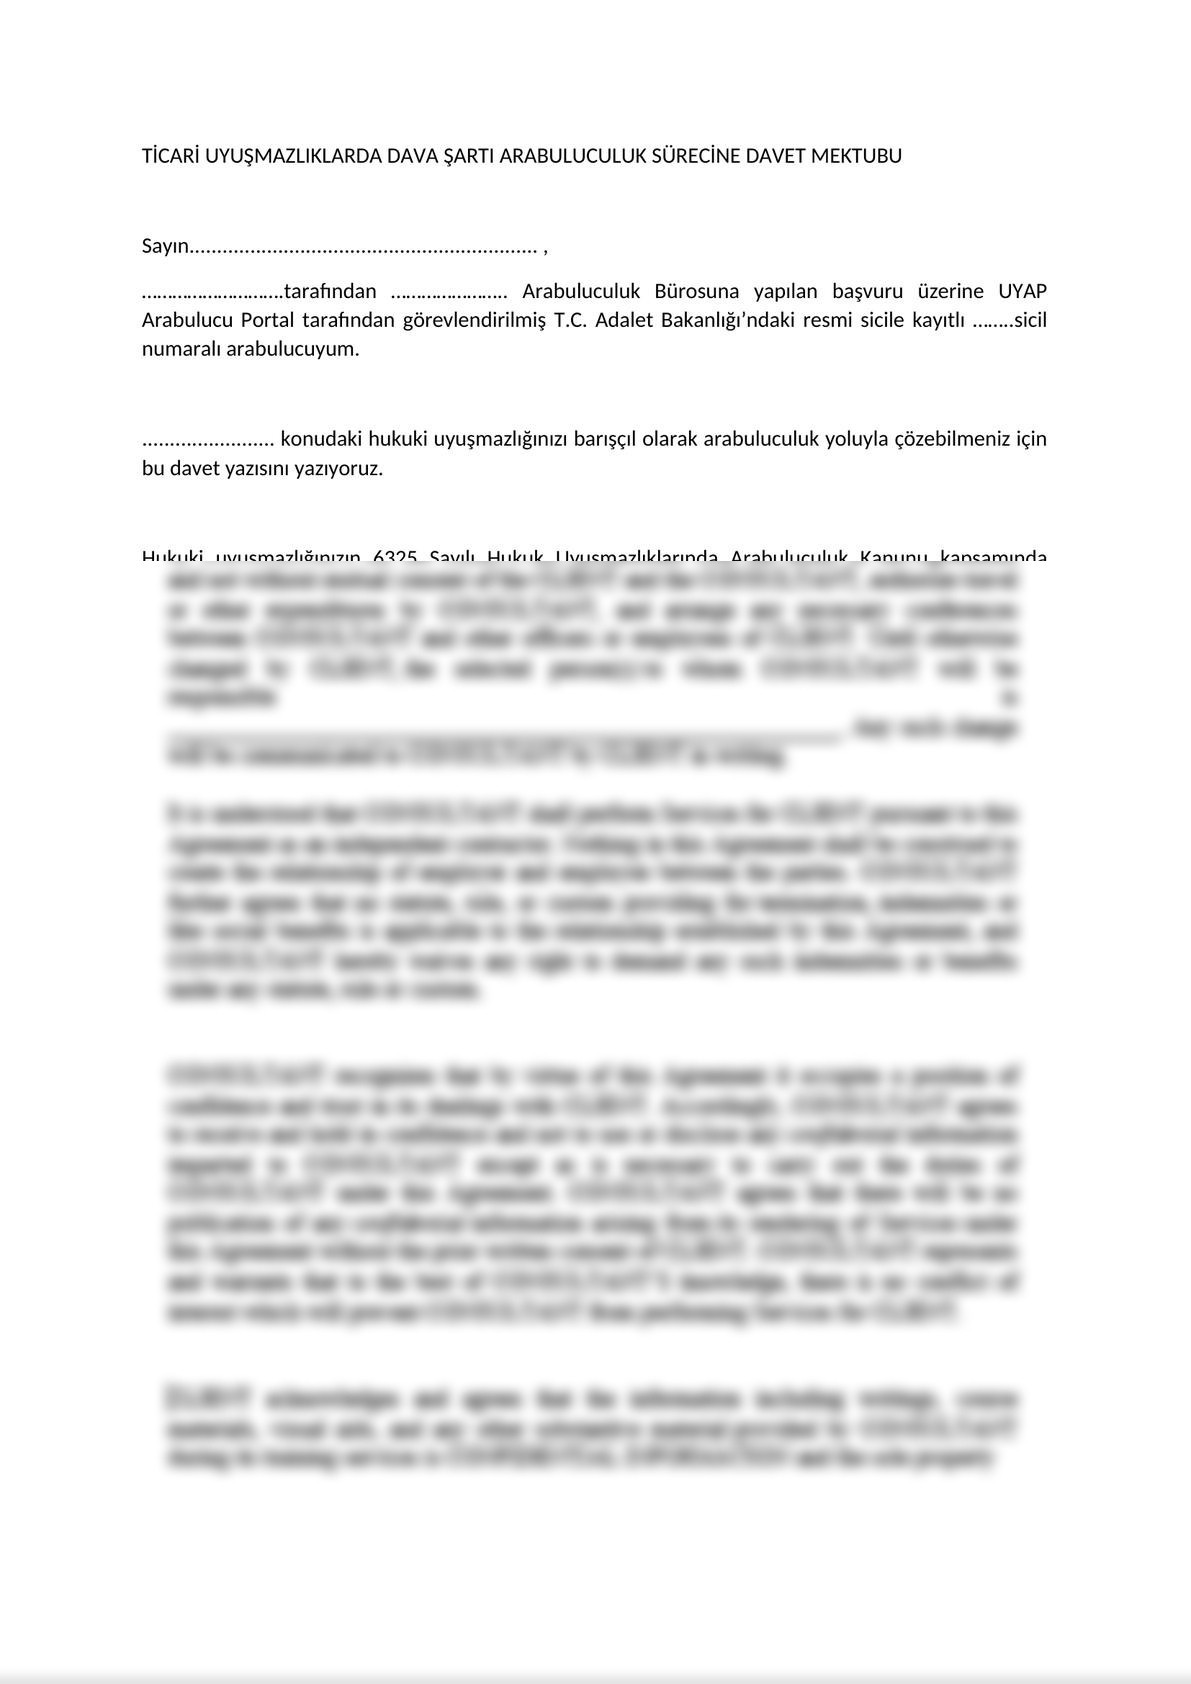 Invitatition Letter to Parties of Mandatory Mediation on Commercial Disputes - Turkish -0